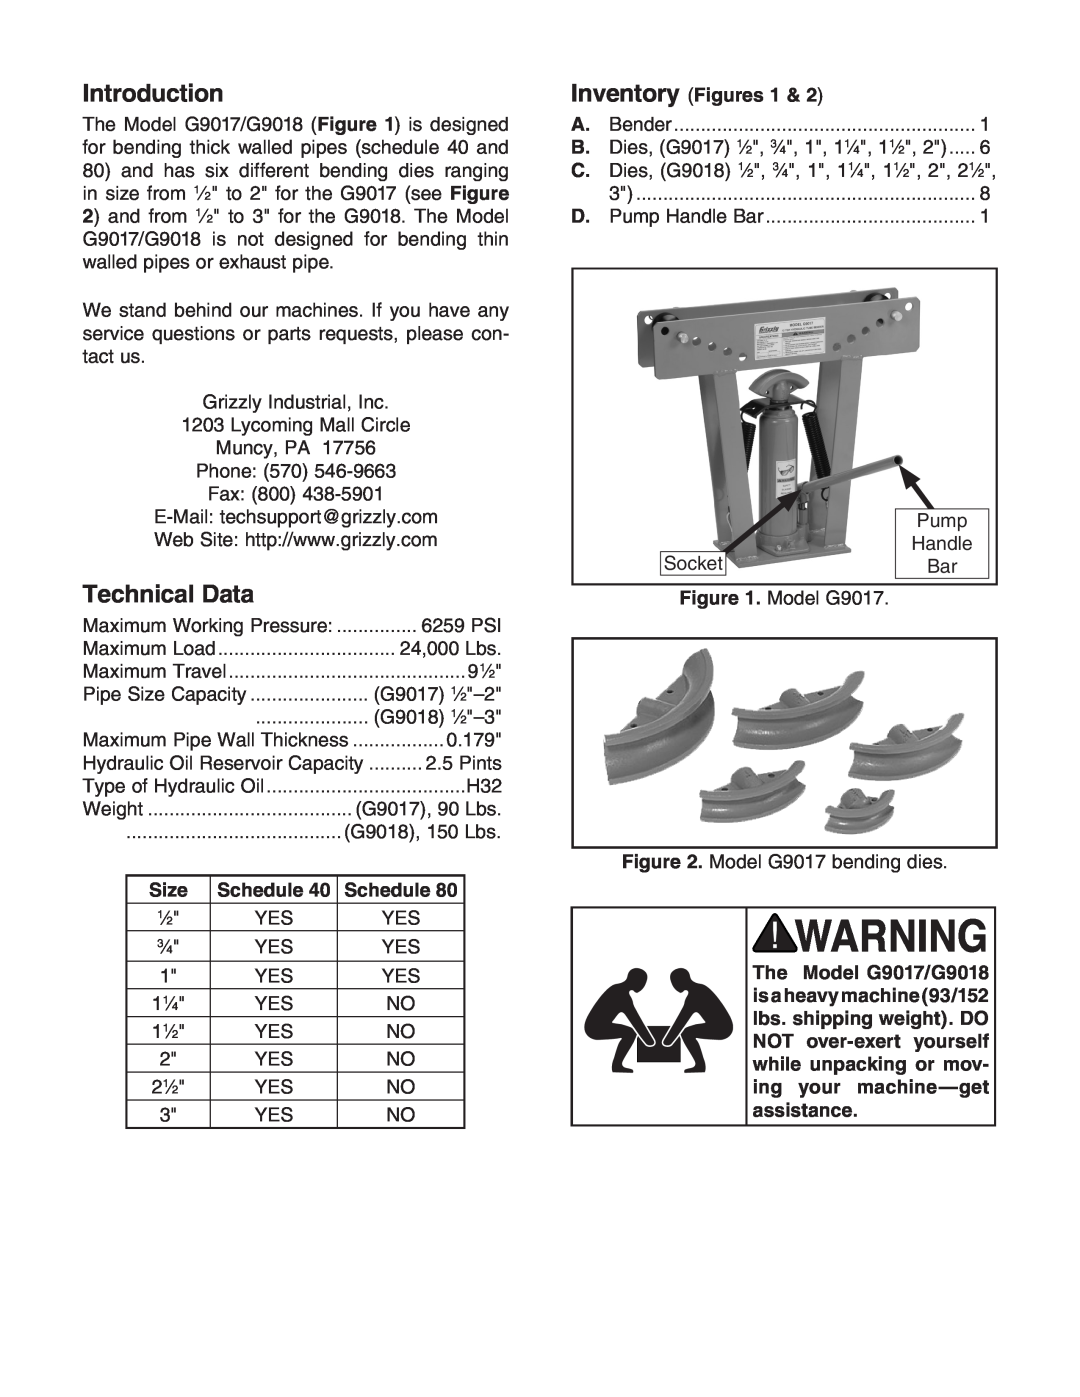 Grizzly G9017/G9018 manual Introduction, Technical Data, Size, Inventory Figures 